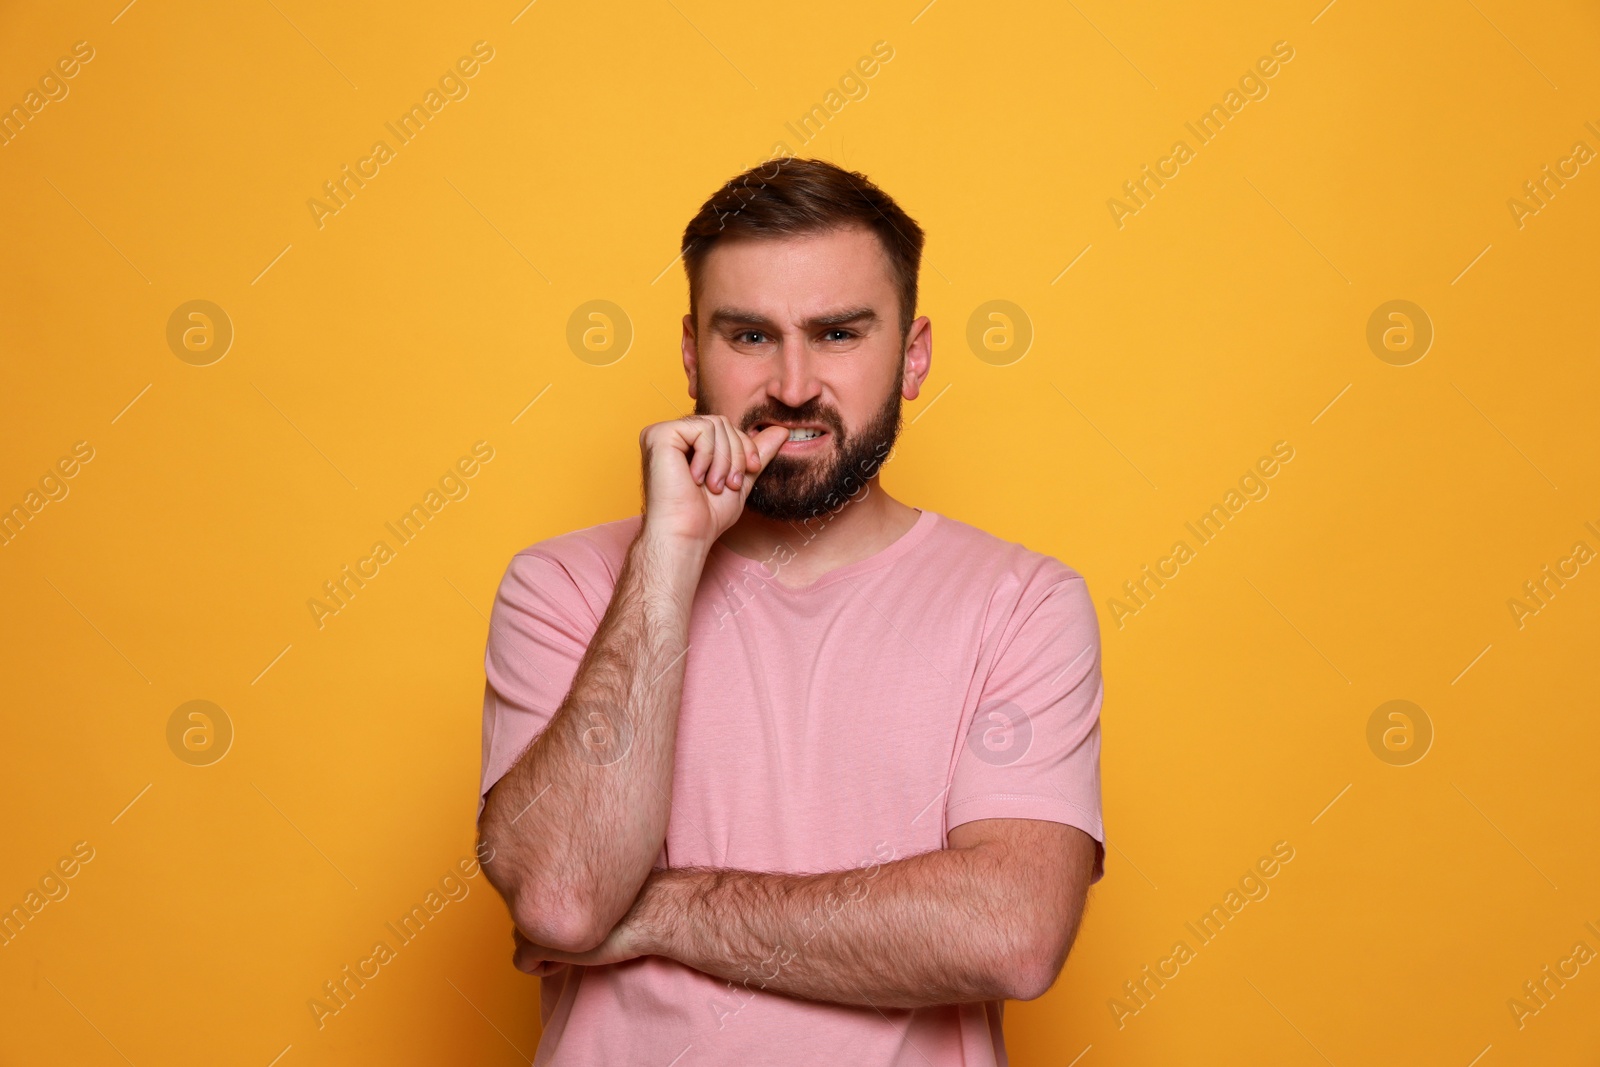 Photo of Man biting his nails on yellow background. Bad habit